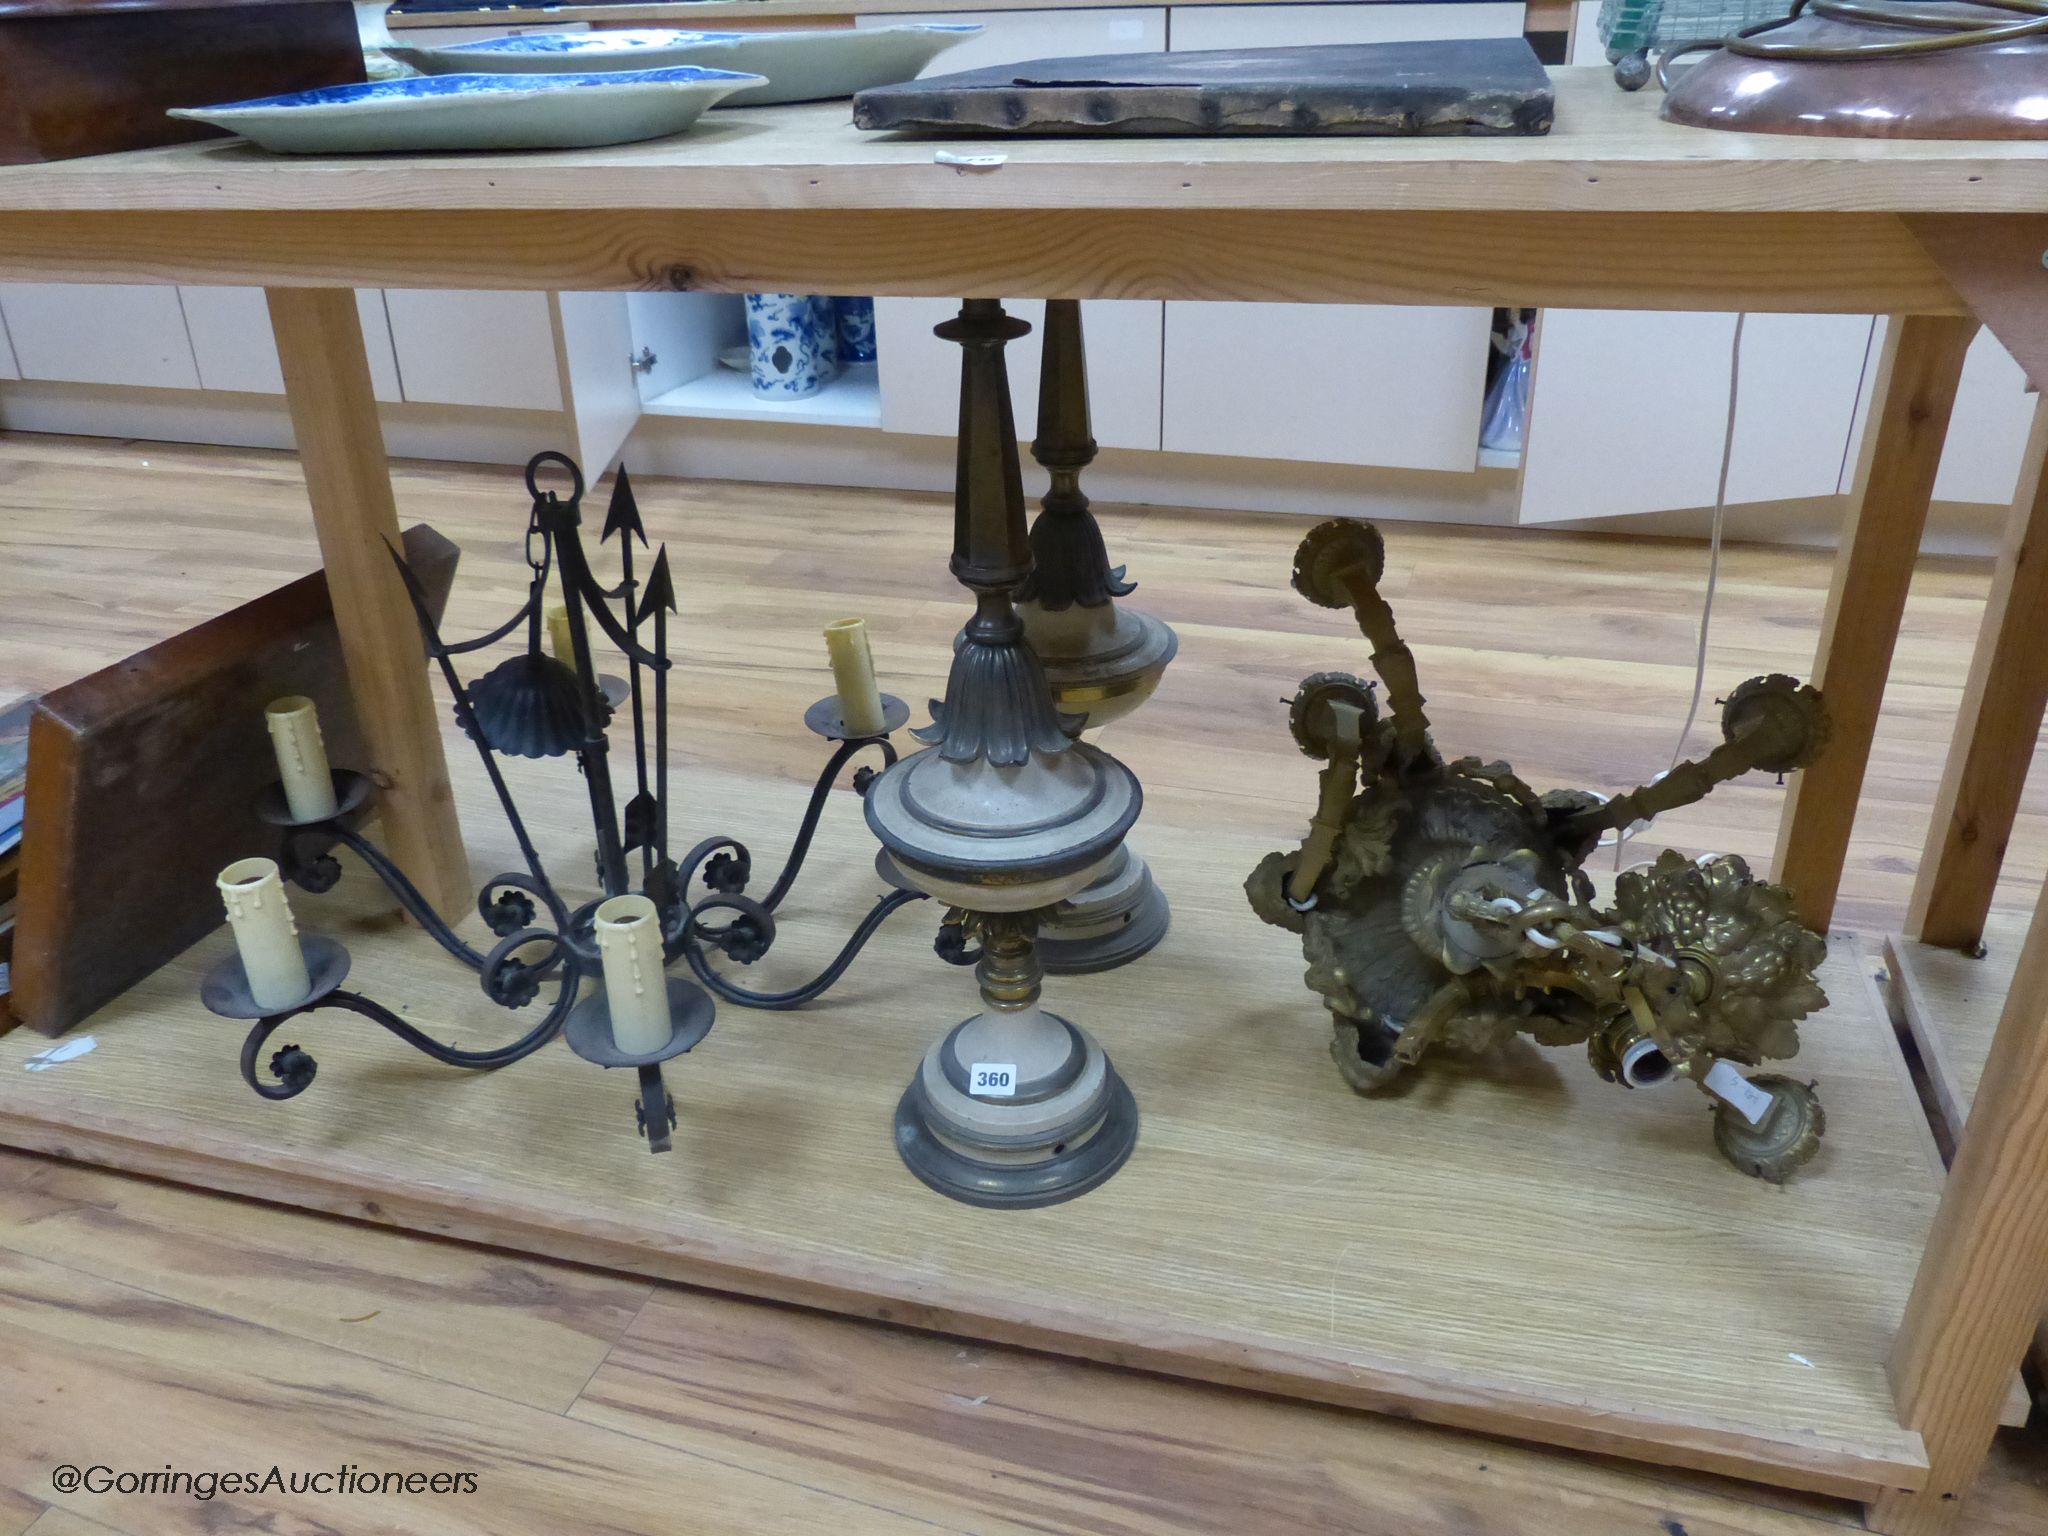 A cast brass electrolier, an ironwork exampleband a pair of table lamps